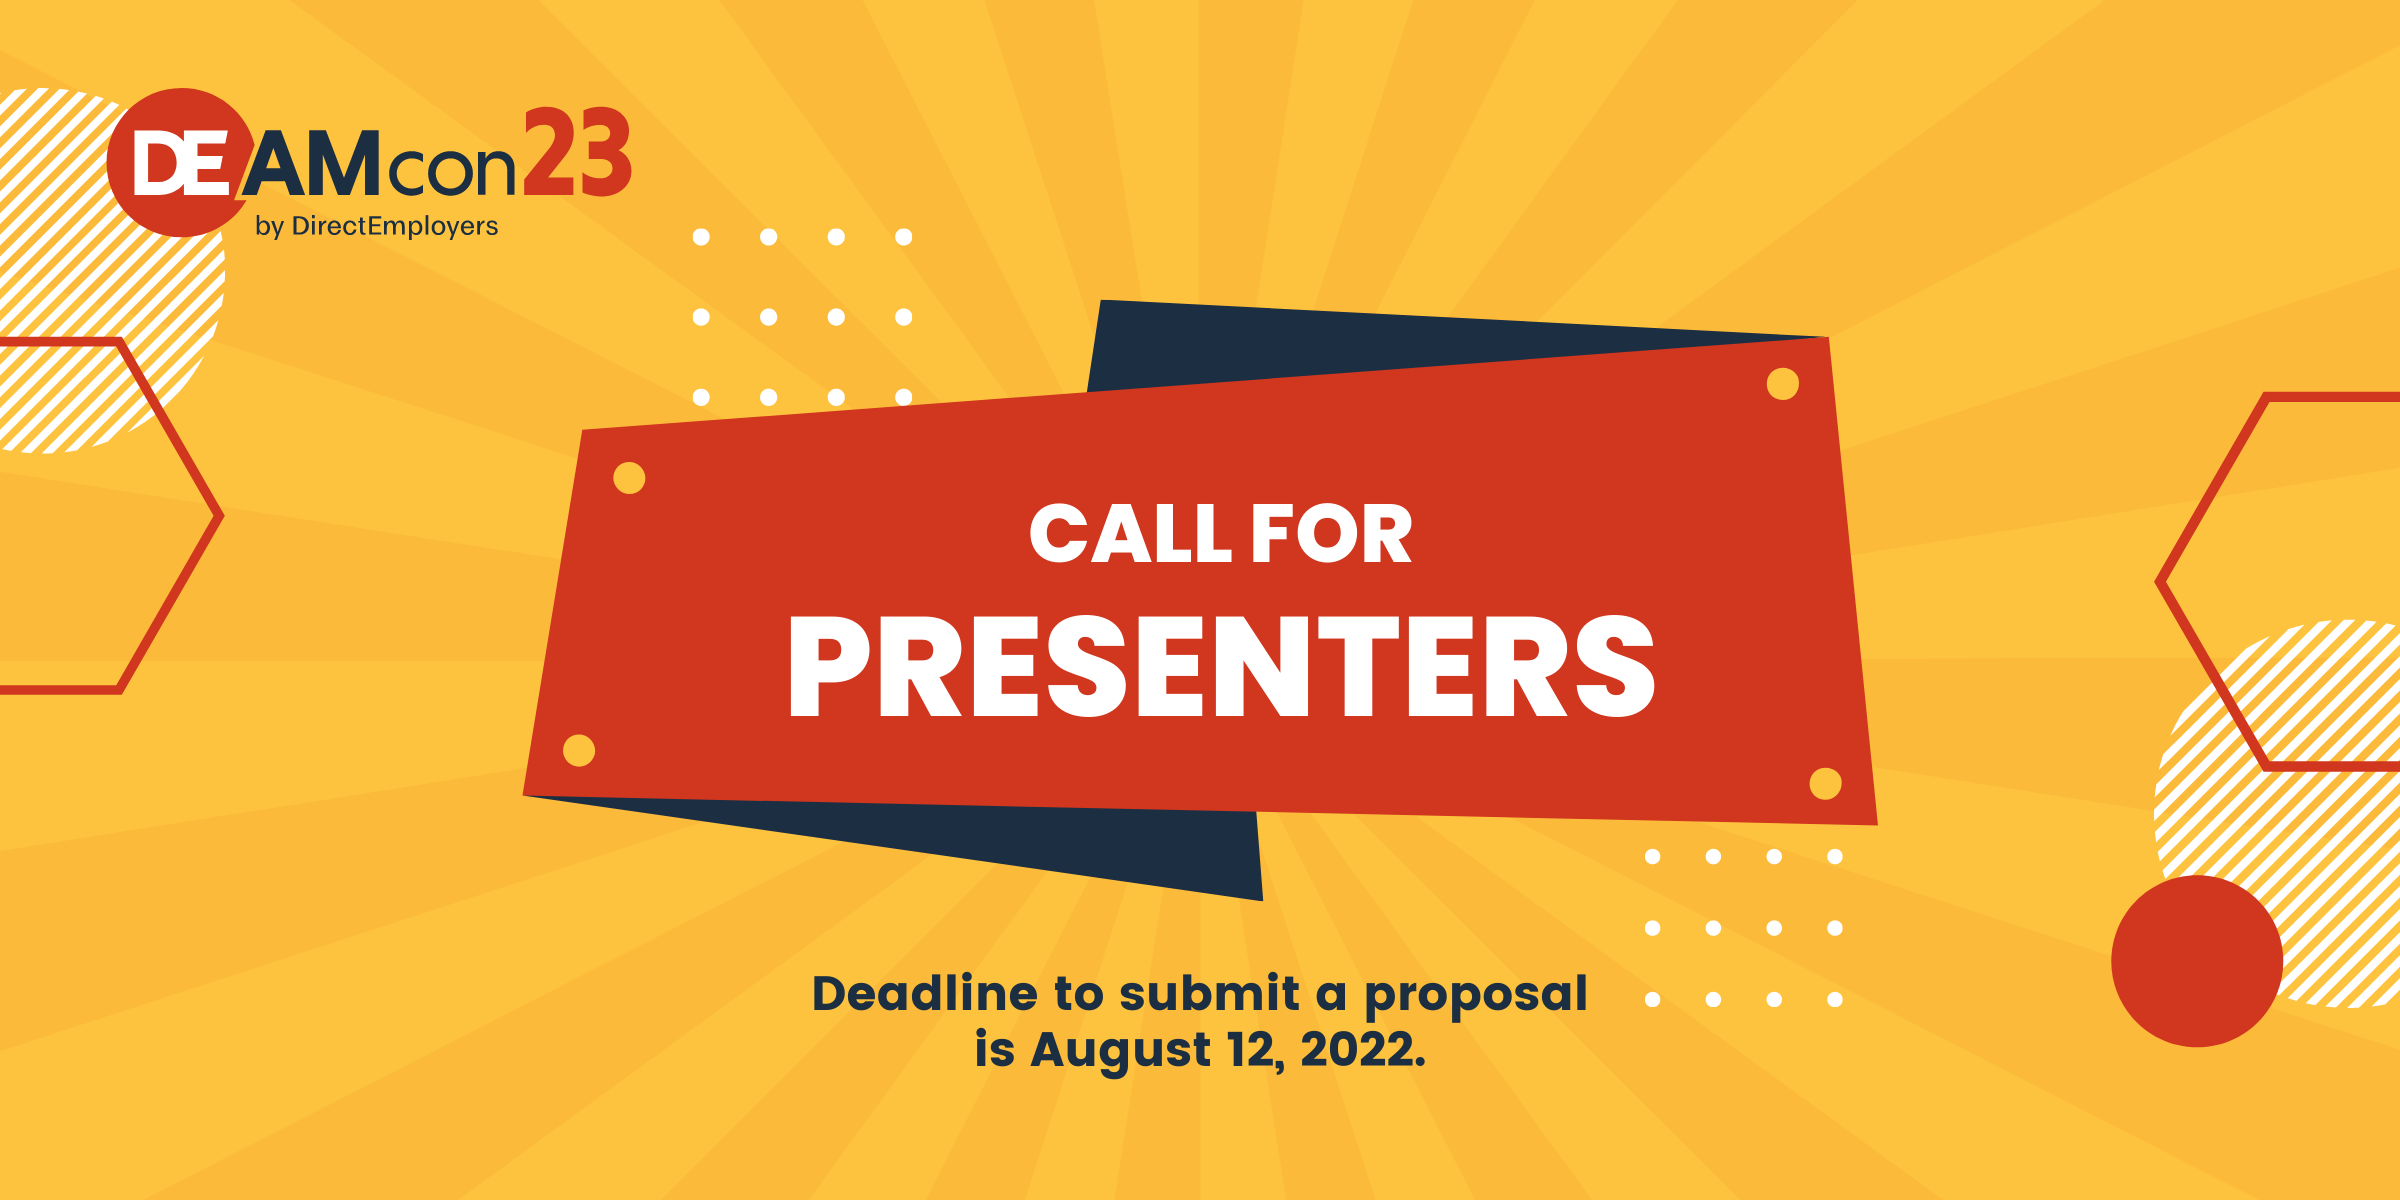 DEAMcon23 Call for Presenters | Deadline August 12, 2022